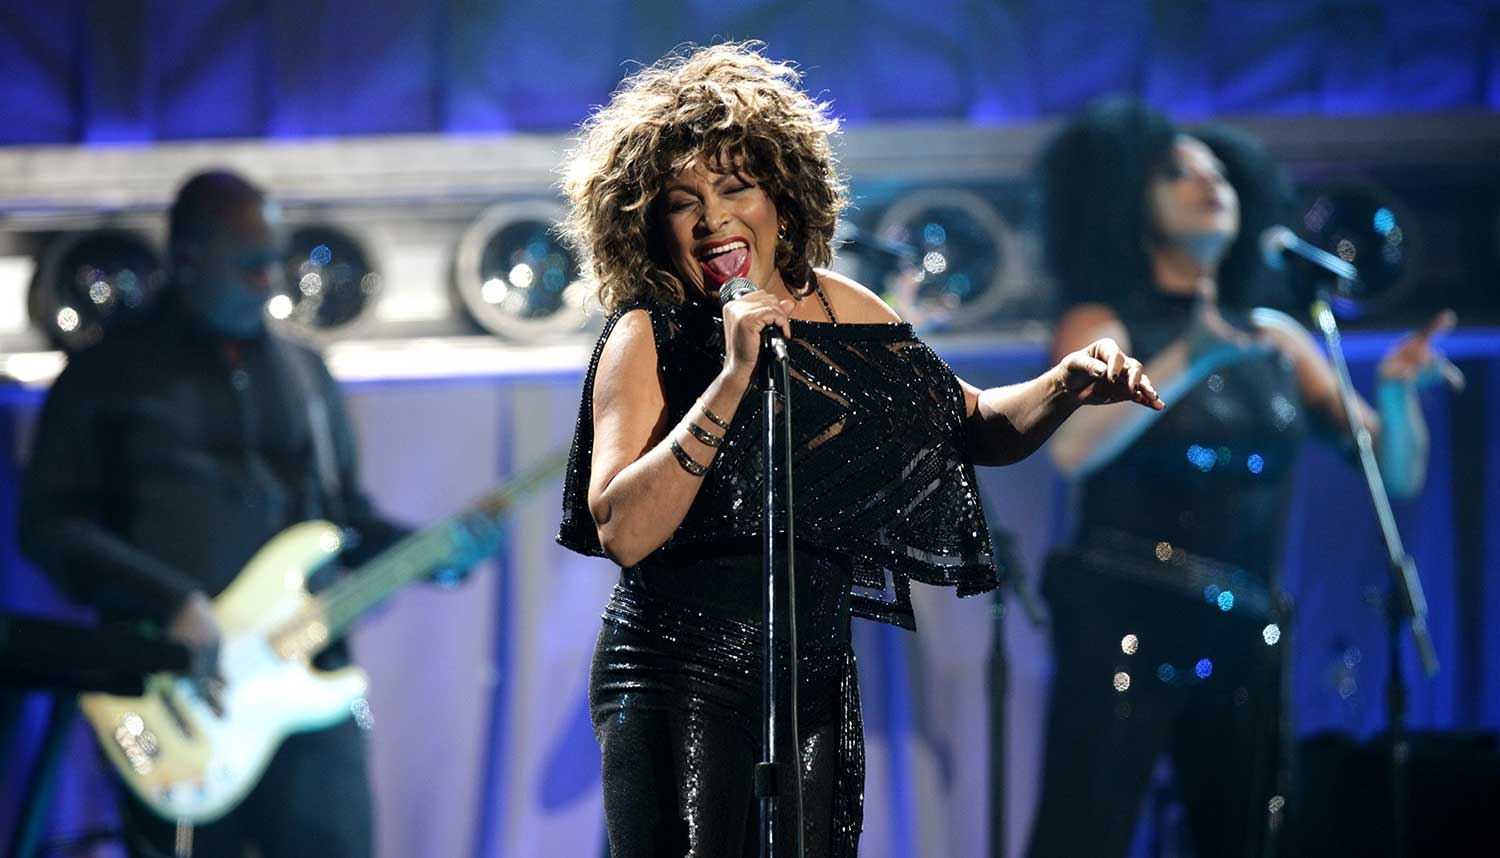 Tina Turner sings into a microphone with a backup singer and a guitar player in the background.